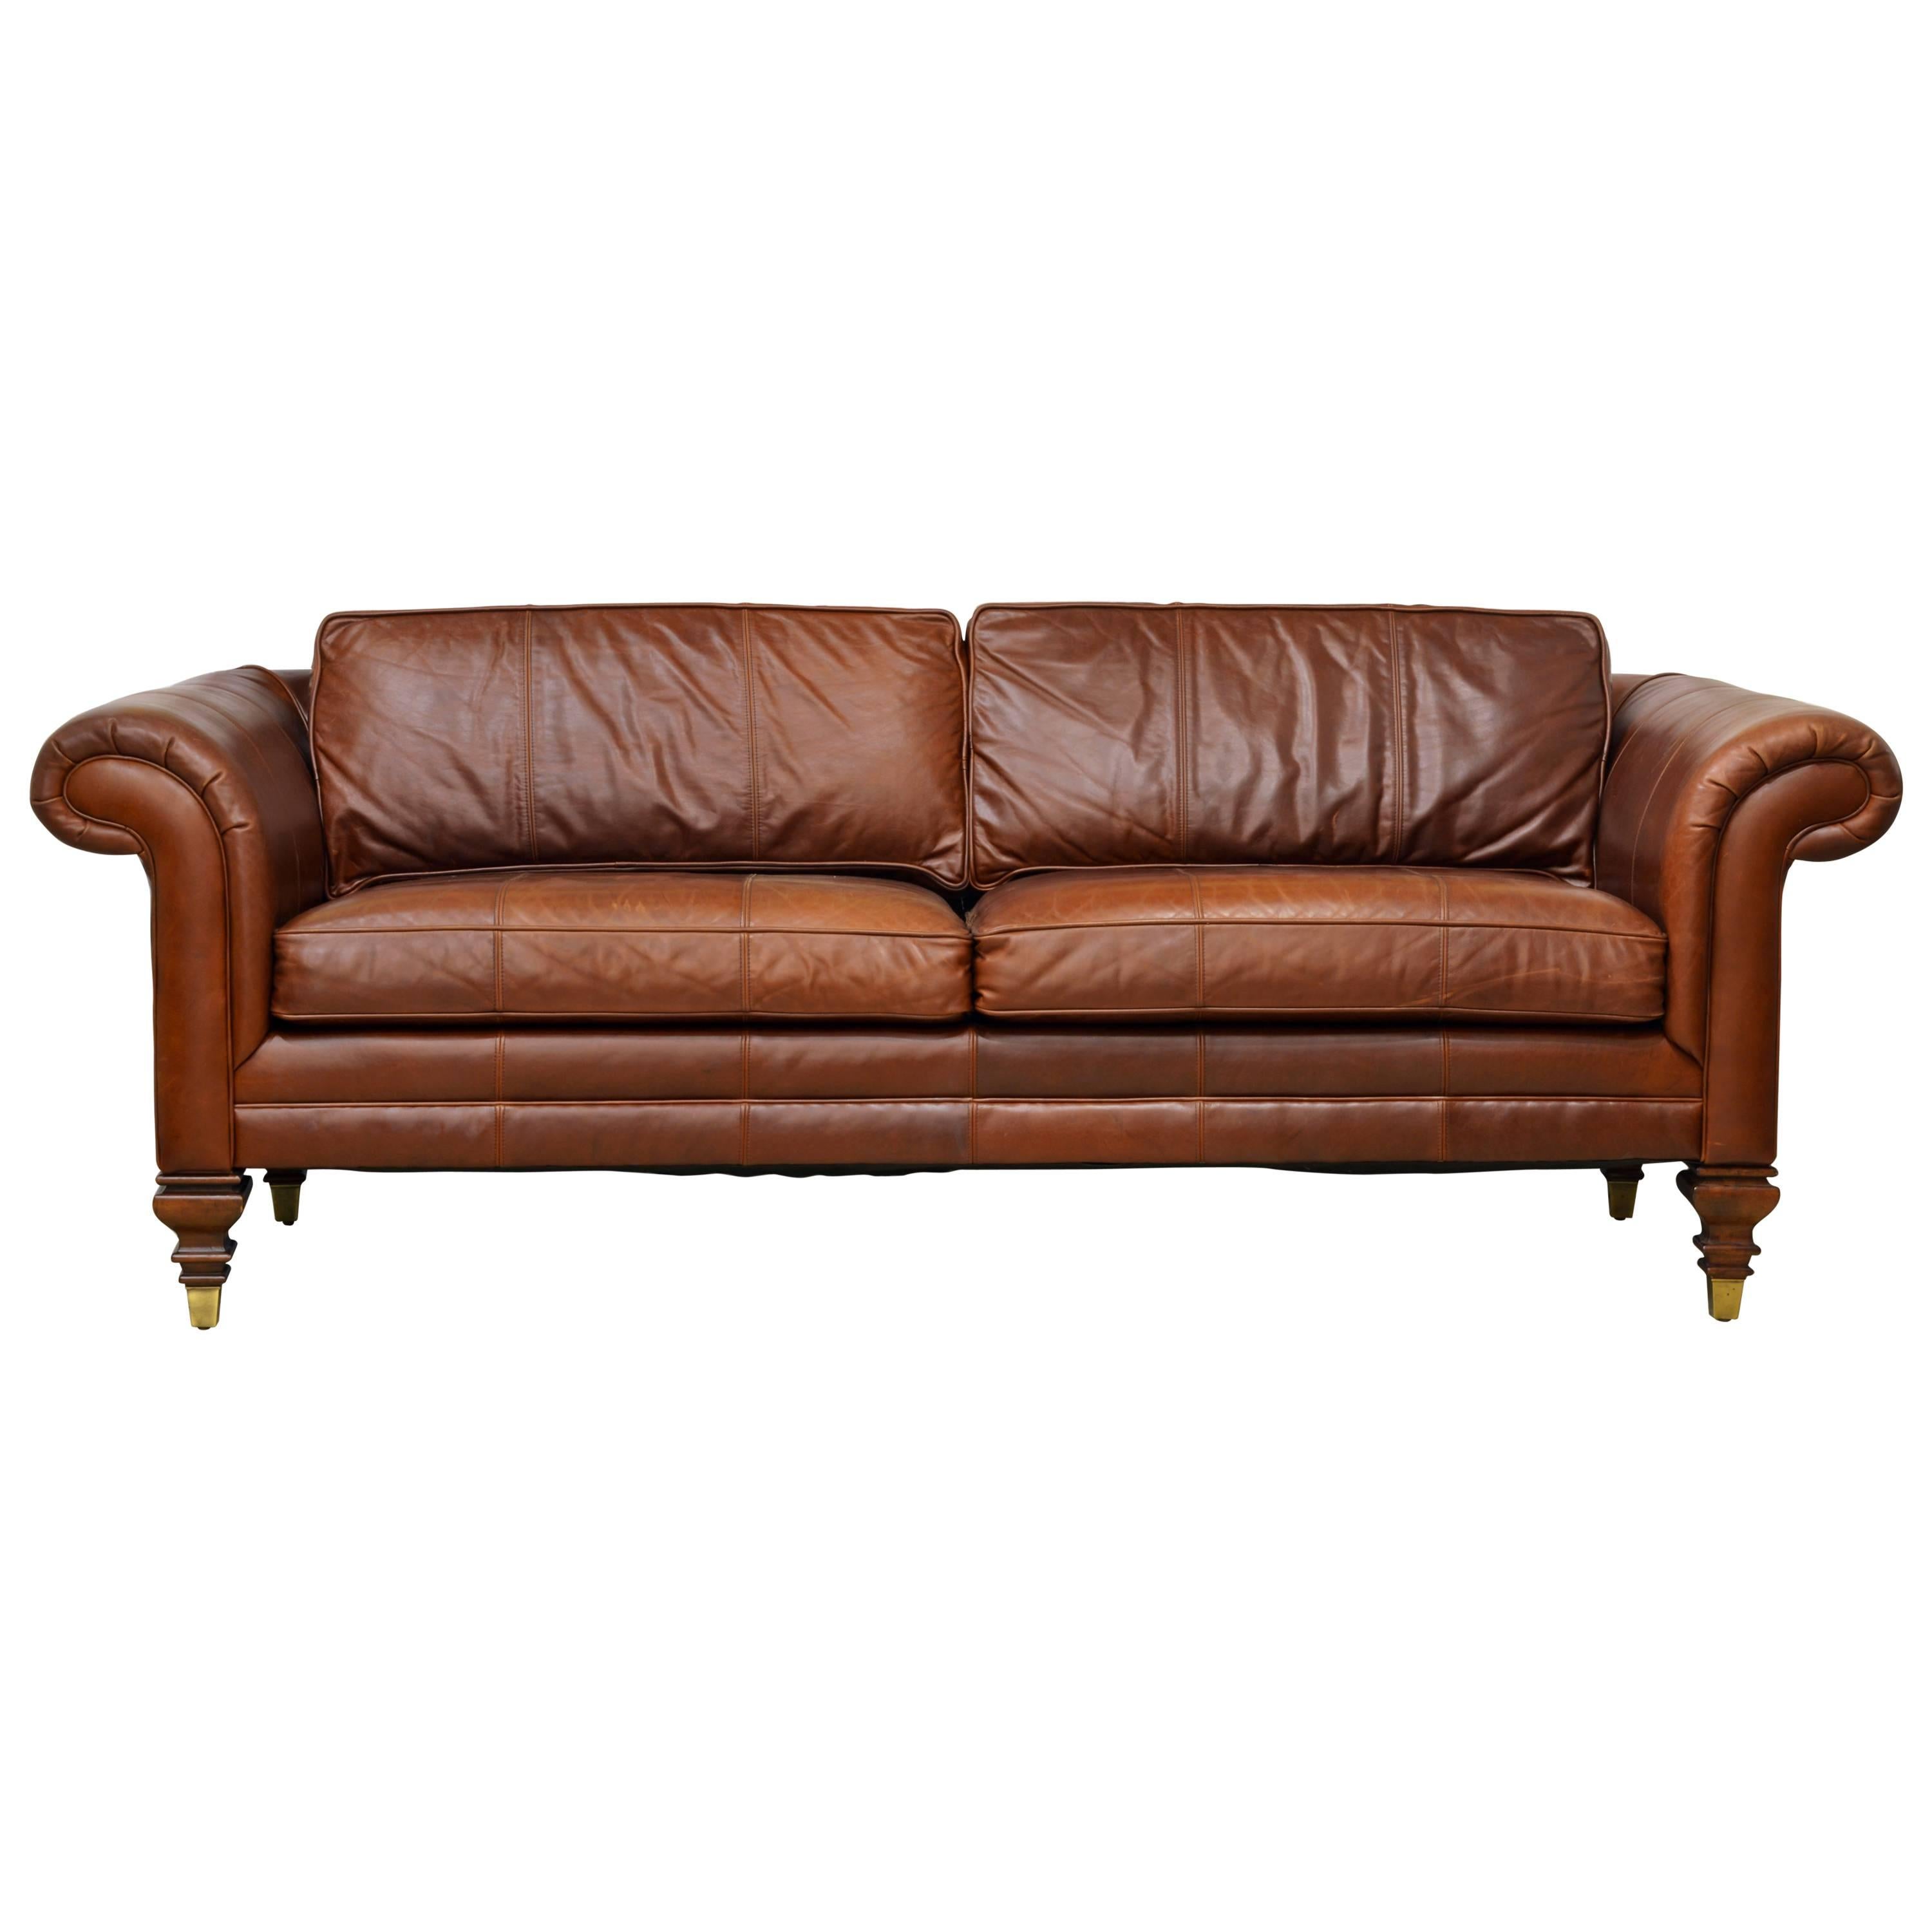 Vintage High Quality Colonial Style Ralph Lauren Leather Sofa with Rolled Arms